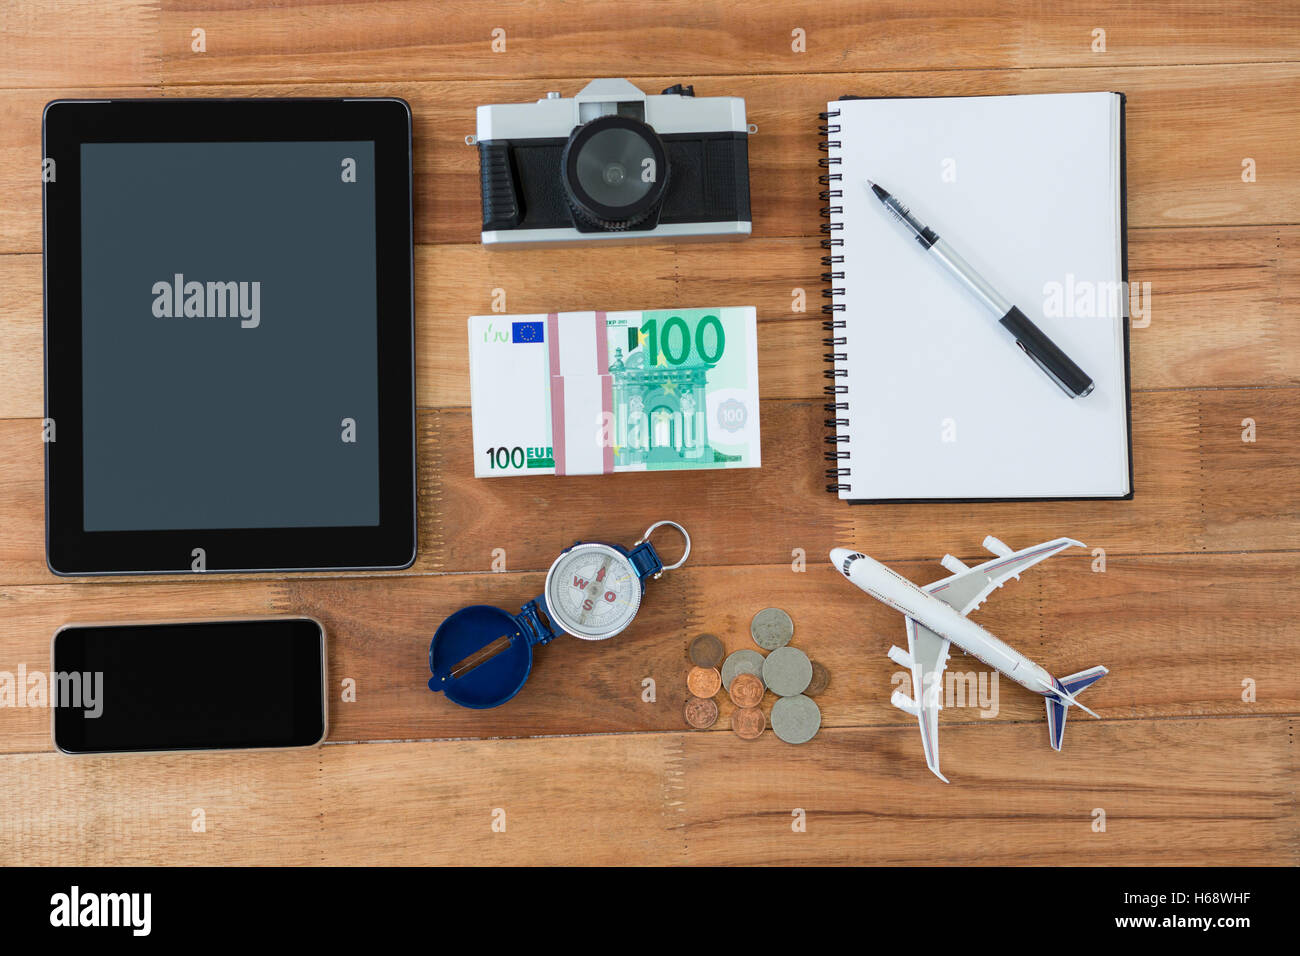 Electronic gadgets, camera, dollar, coin, diary, pen, compass, and airplane model Stock Photo